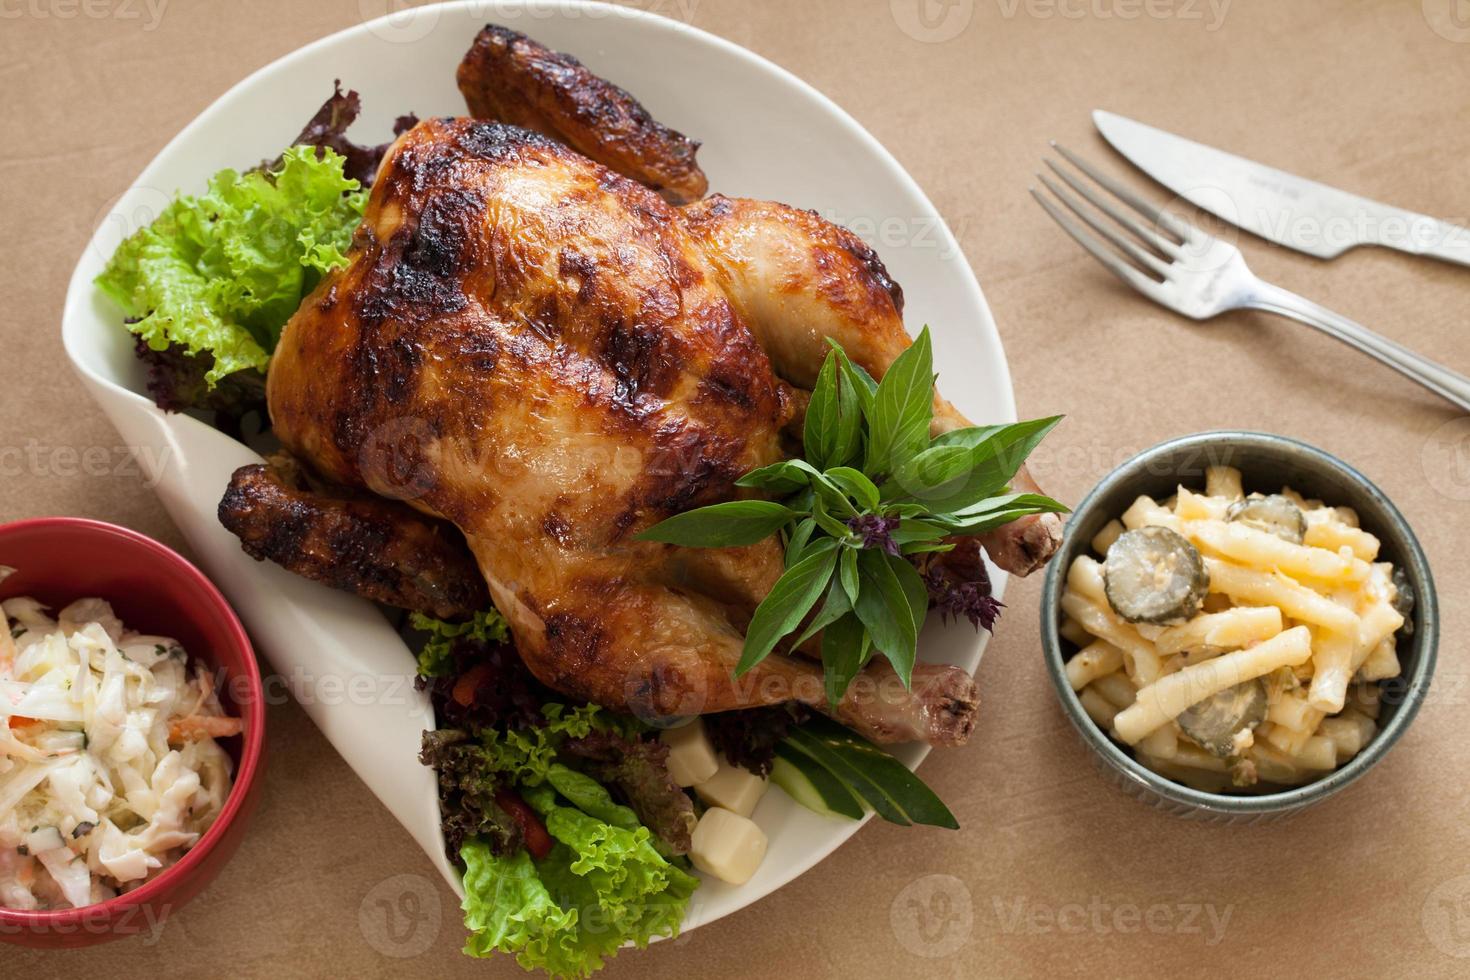 Chicken rotisserie with pasta salads on the sides, knife and fork, closeup on a ceramic plate on the table. Horizontal top view from above photo